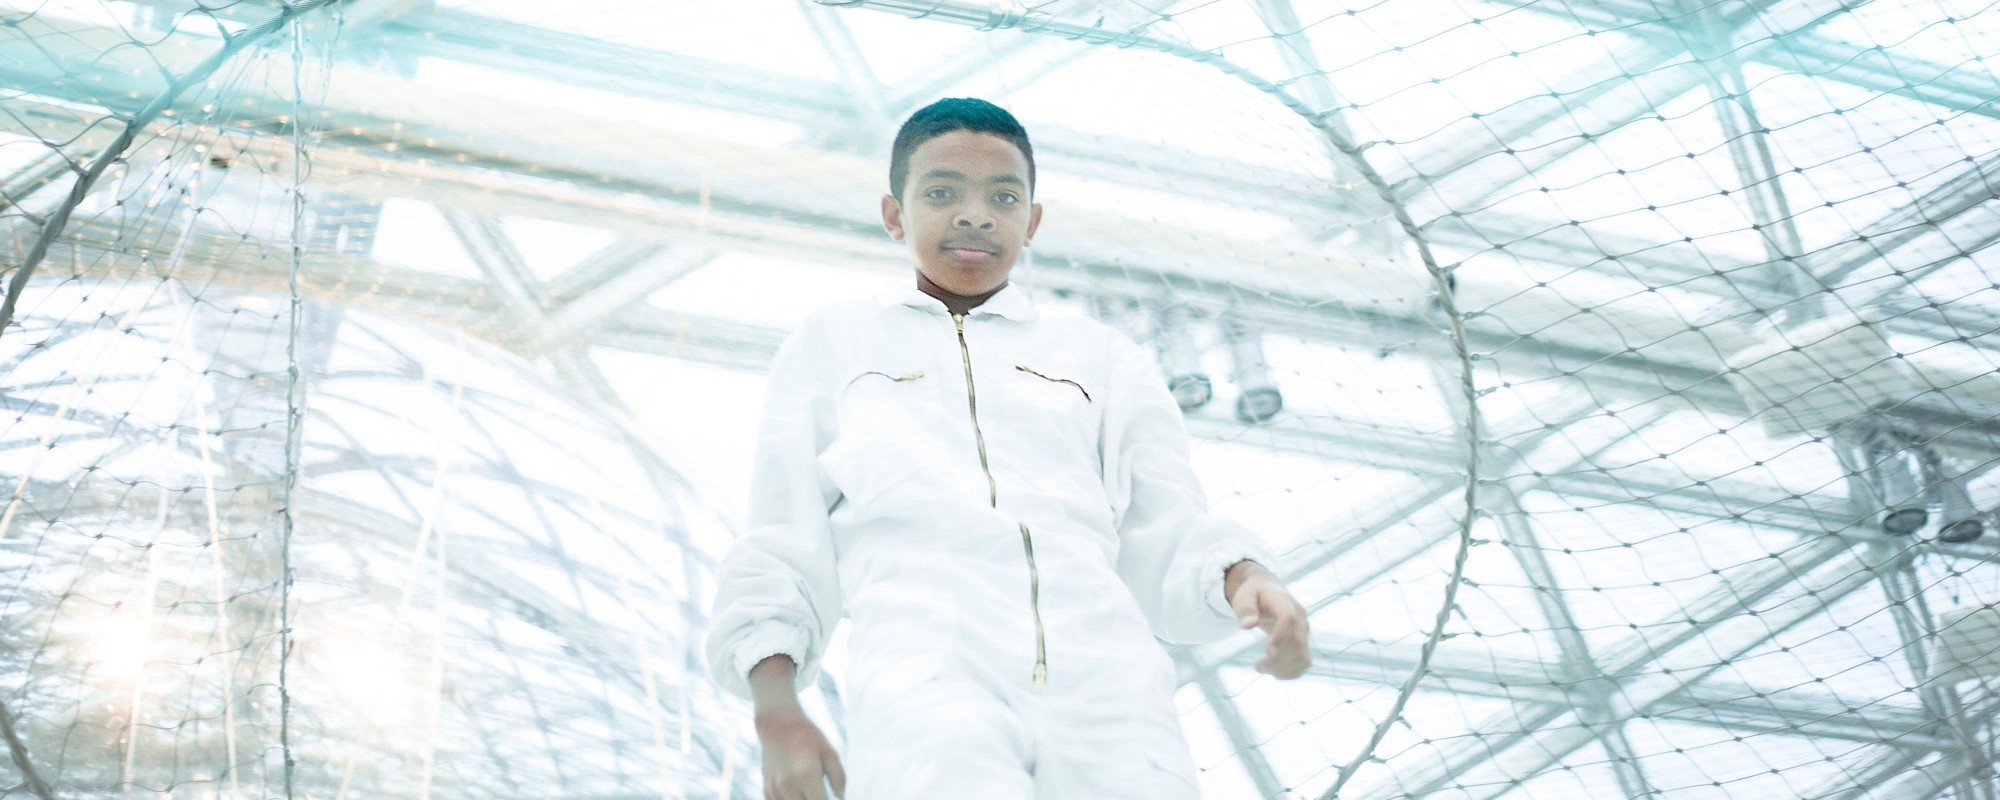 A young black boy in a white jumpsuit stands inside a large net-bubble structure.